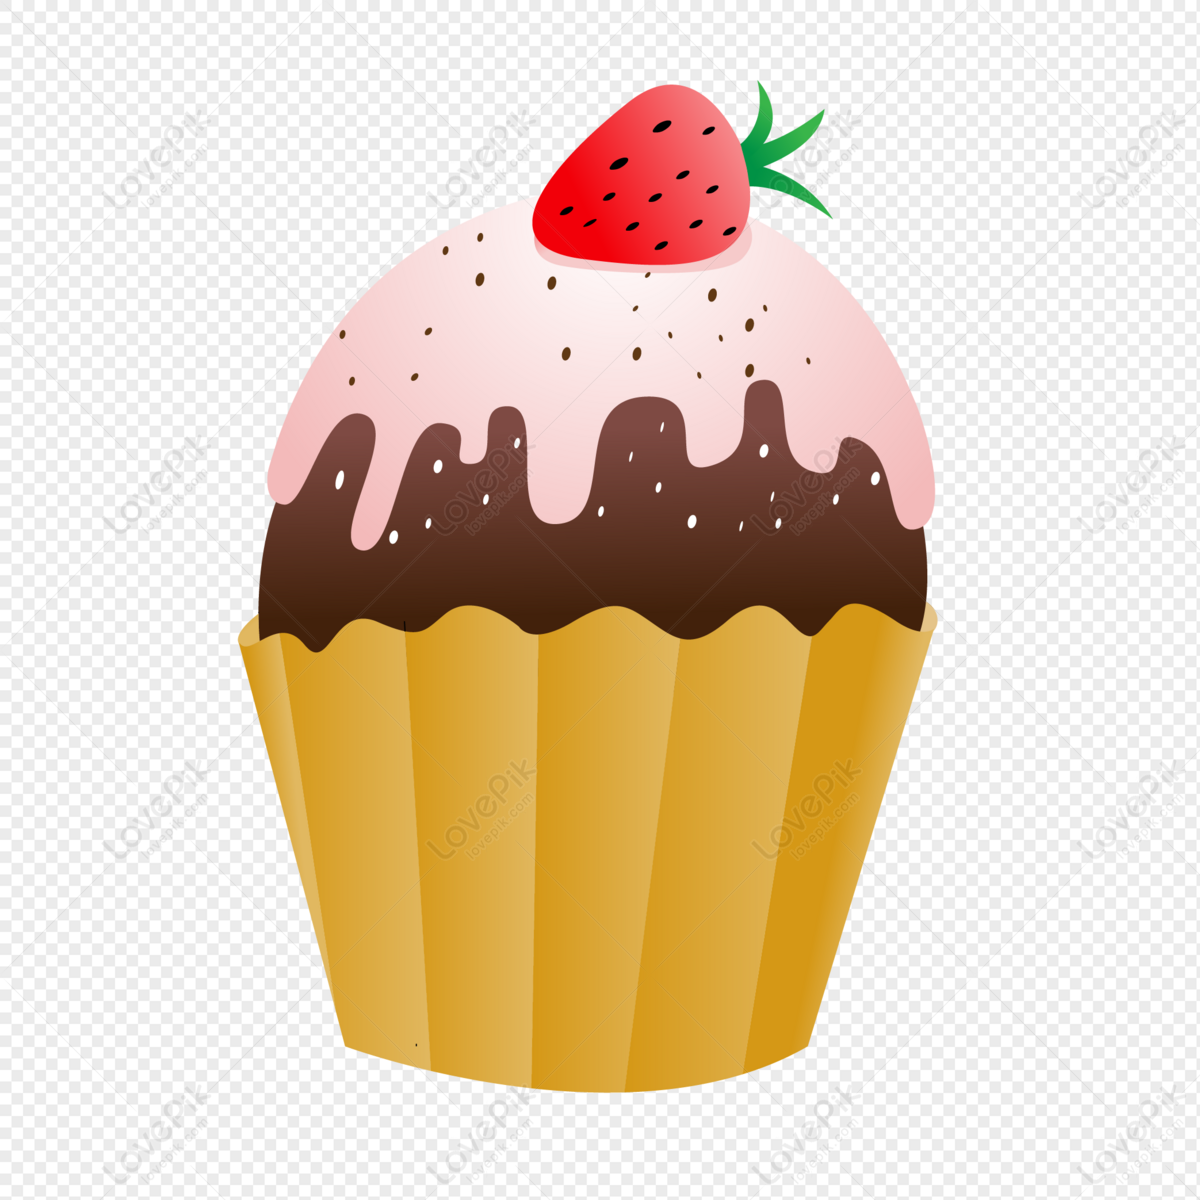 Illustration Hand Drawn Cartoon Strawberry Cupcake Free PNG And Clipart  Image For Free Download - Lovepik | 401215999